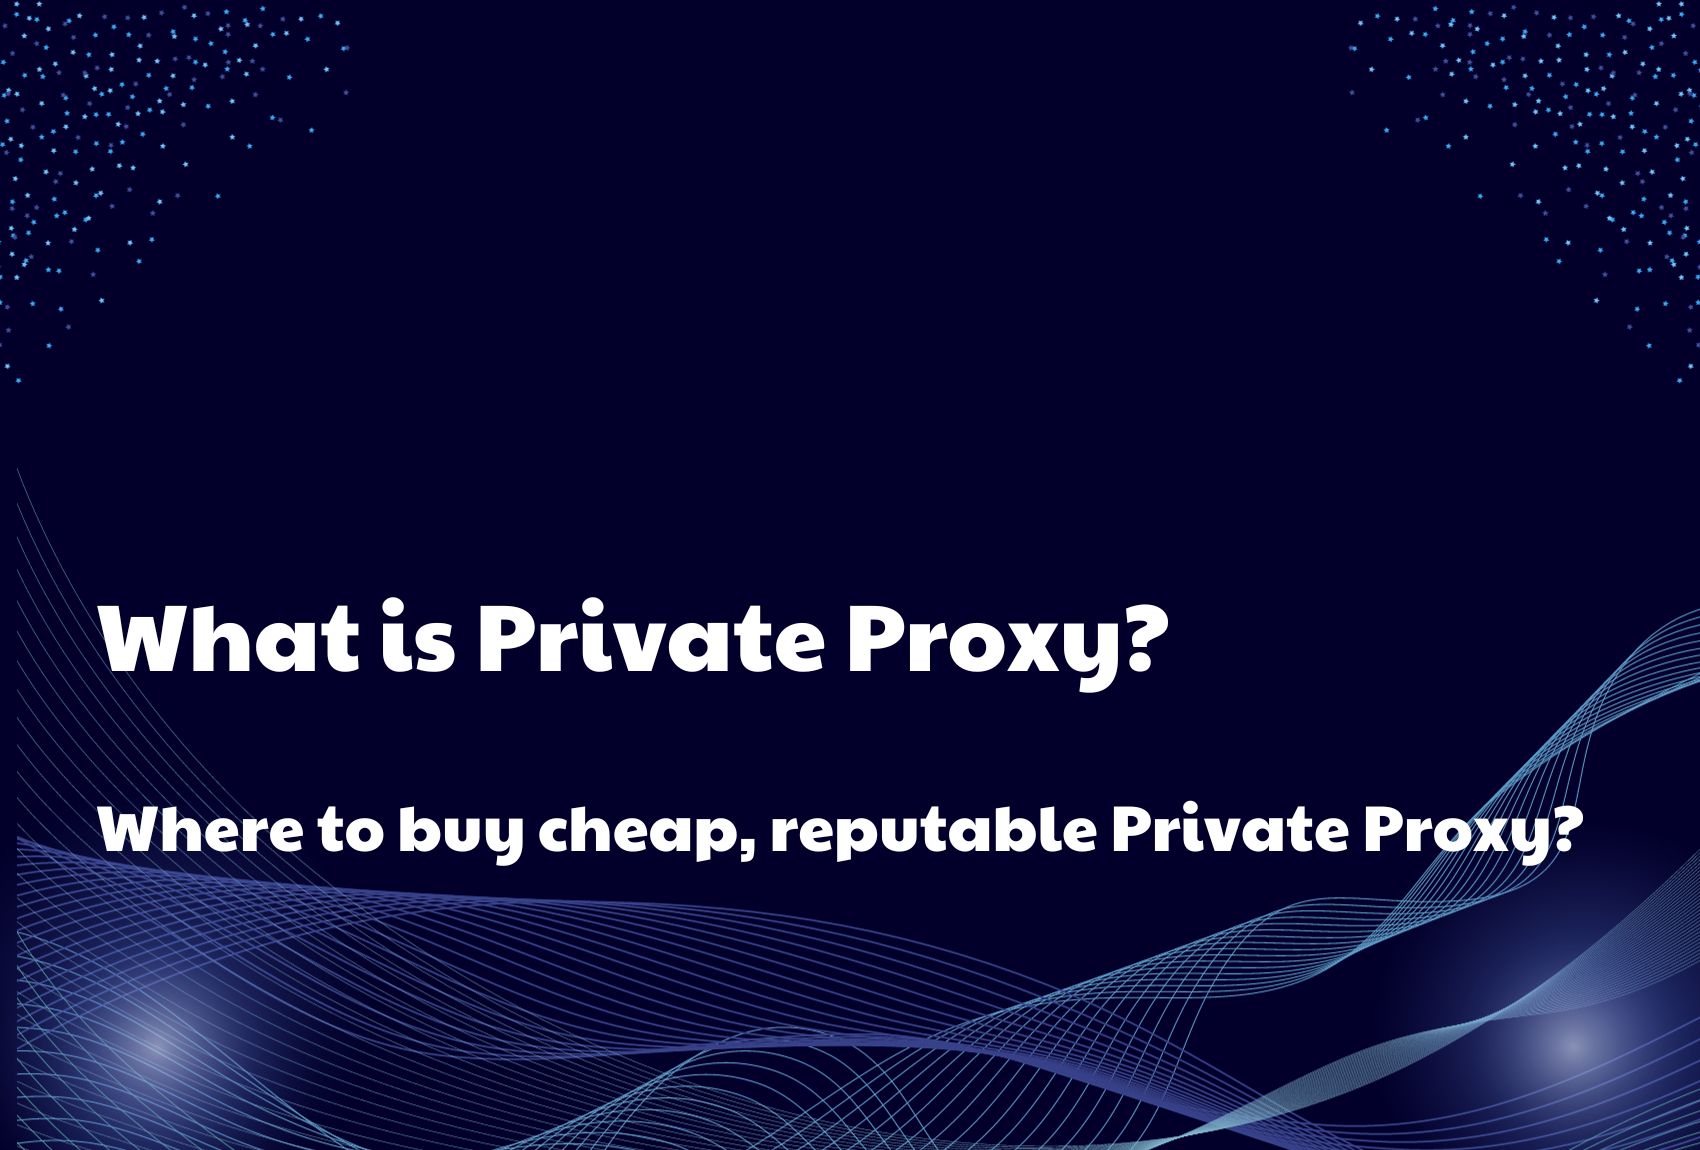 What is Private Proxy? Where to buy cheap, reputable Private Proxy?